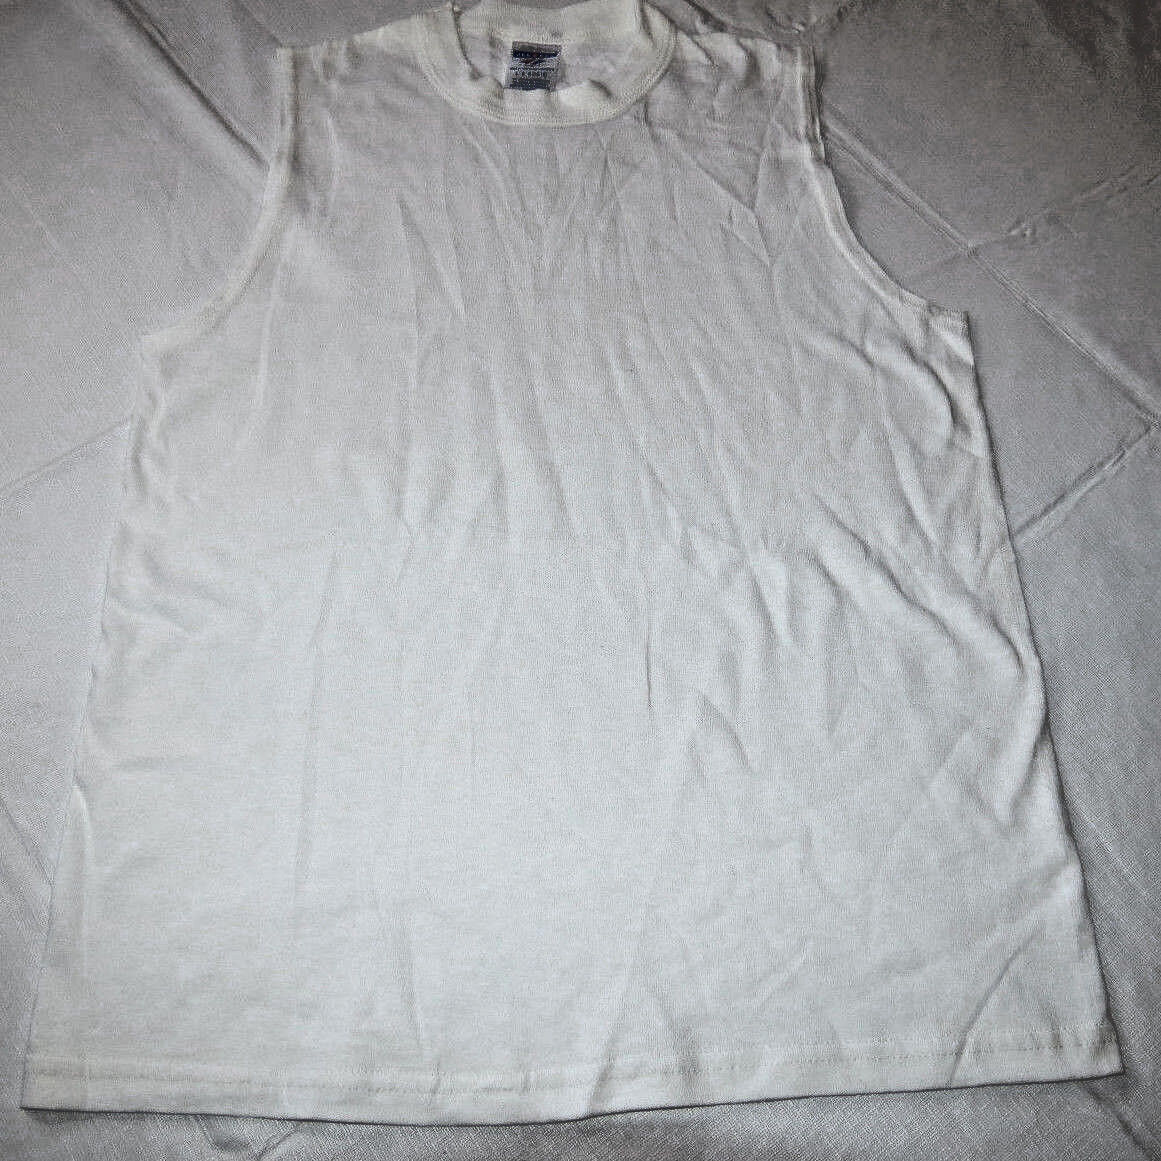 Primary image for Jerzees Heavyweight Cotton L 14-16 Boys youth sleeveless shirt white NOS